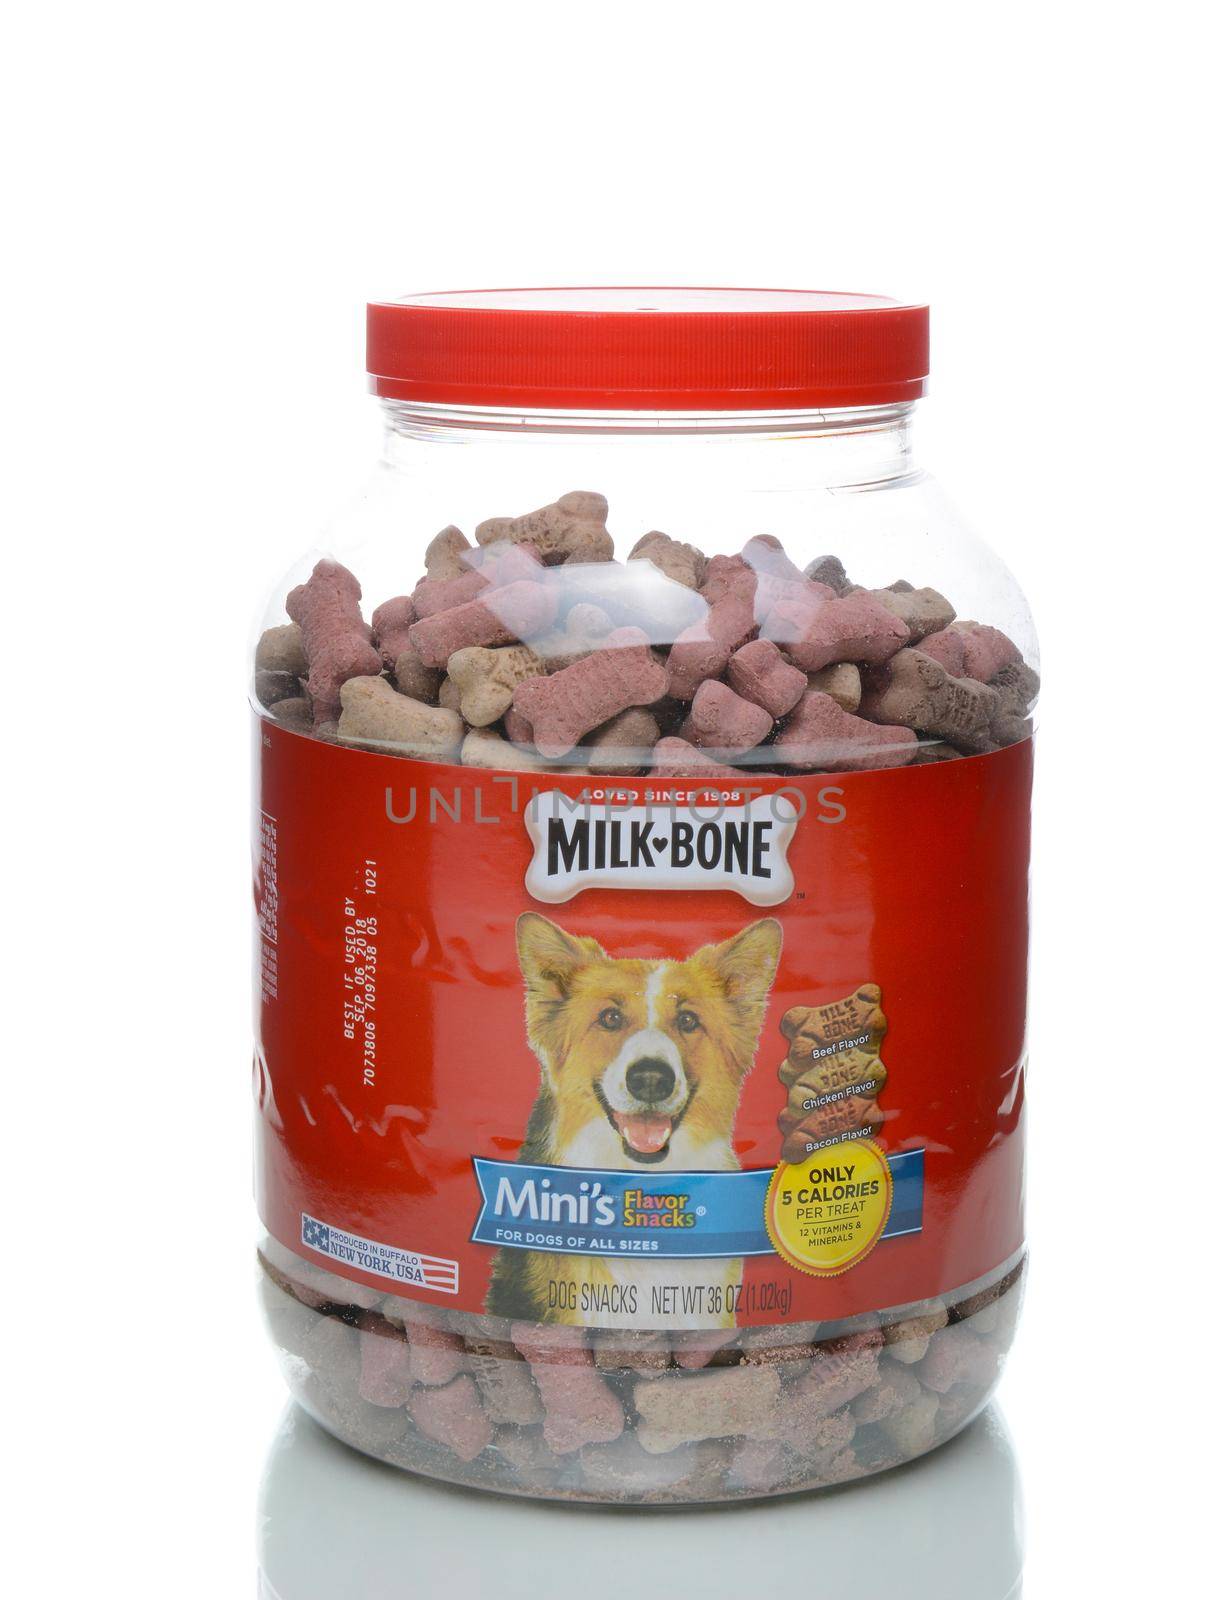 IRVINE, CALIFORNIA - JANUARY 4, 2018: Jar of Milk Bone Minis. Milk-Bone is a brand of dog biscuit, created in 1908. The mini treats contain only 5 calories.